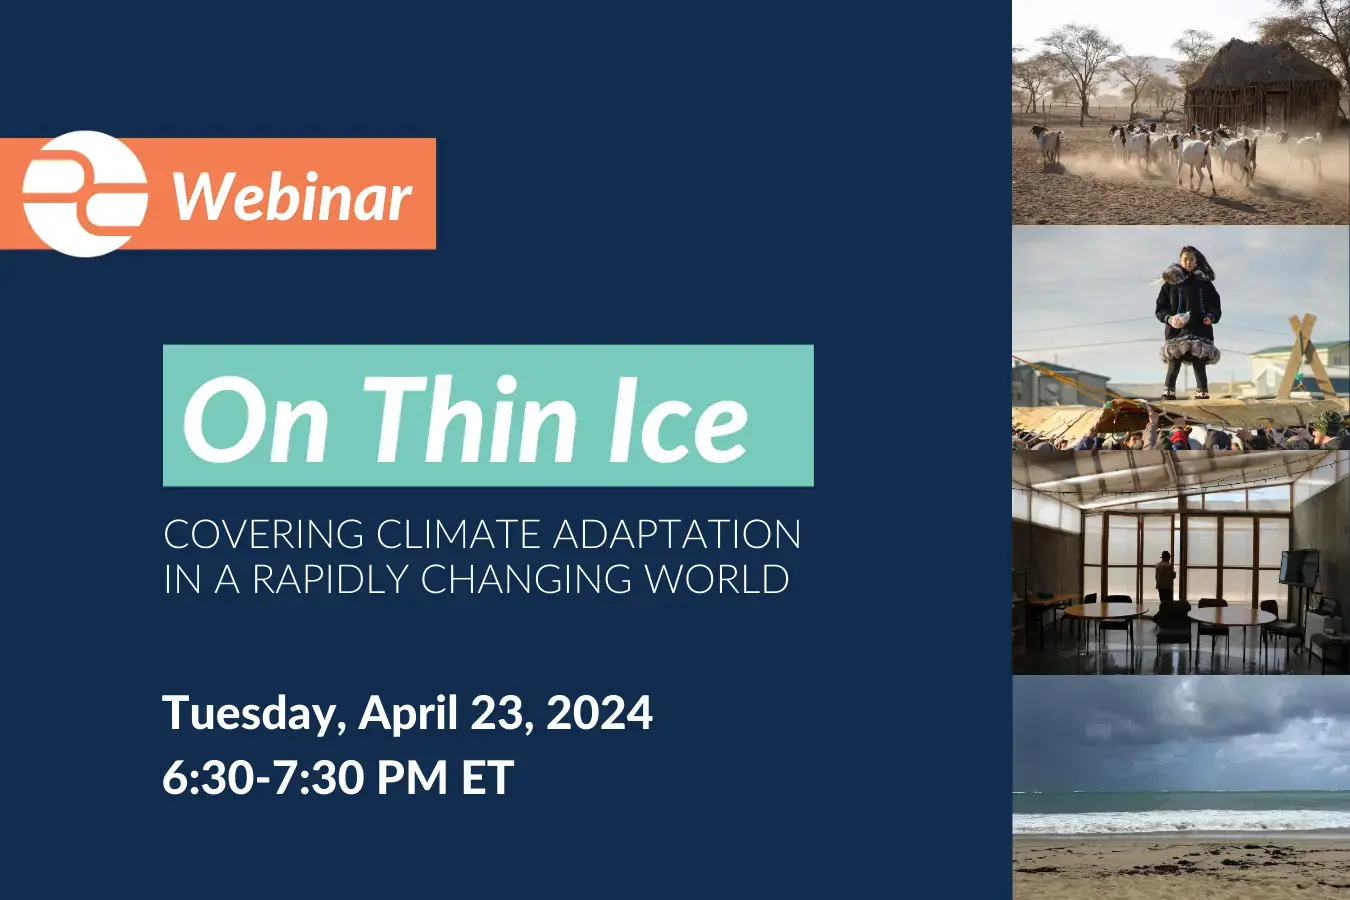 Text: On Thin Ice: Covering Climate Adaptation in a Rapidly Changing World. Tuesday, April 23, 2024. Online Webinar. 6:30 to 7:30 Eastern Time